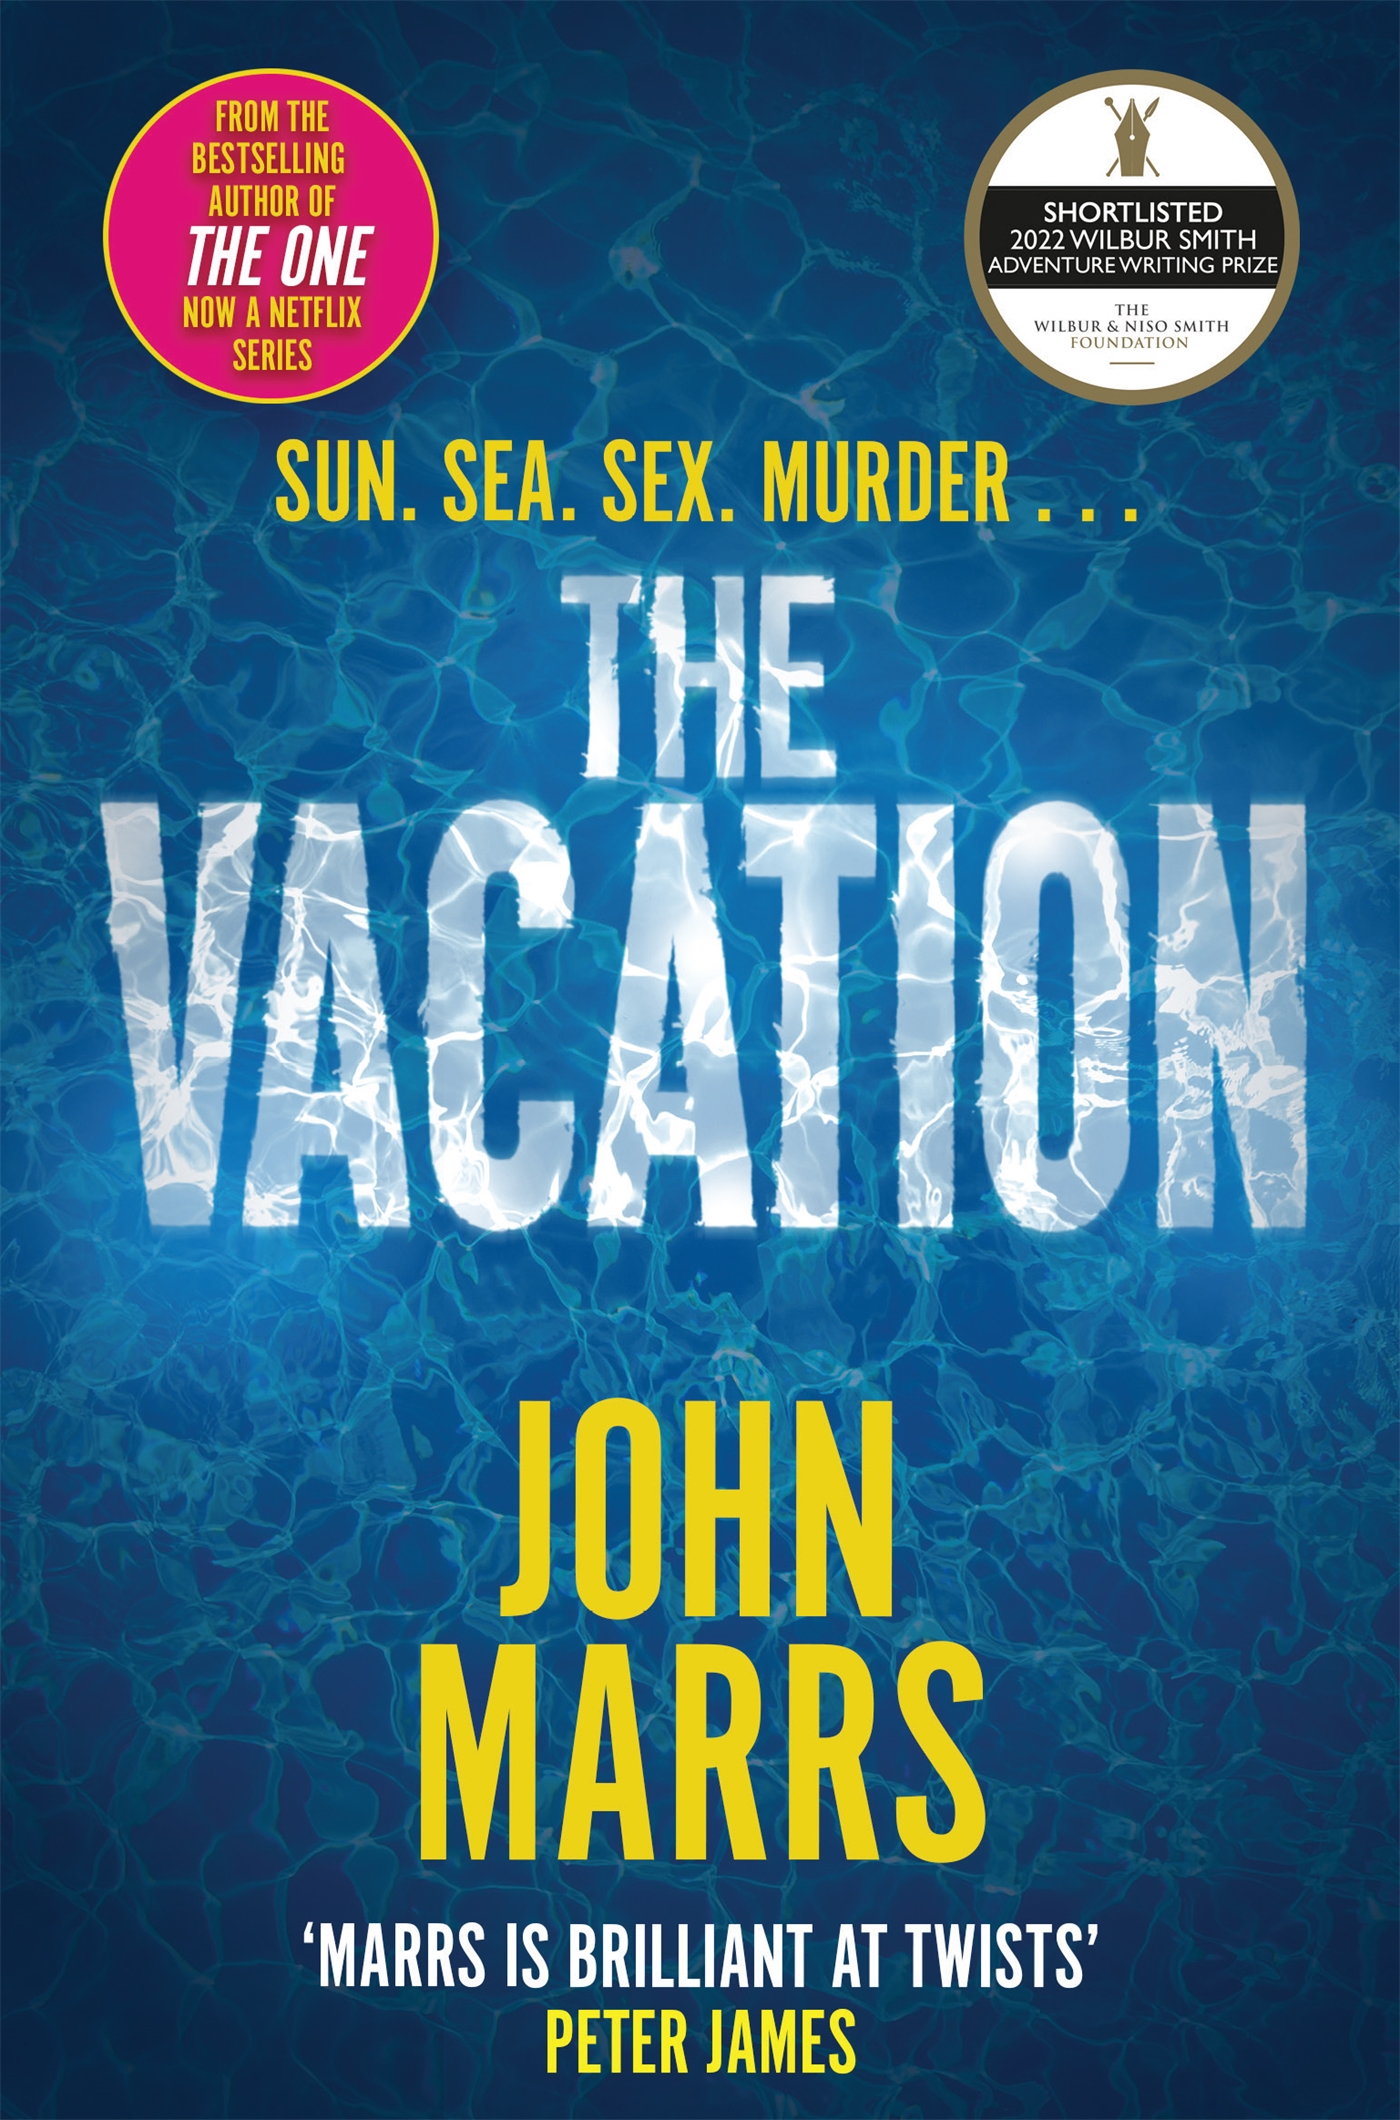 The Vacation cover image